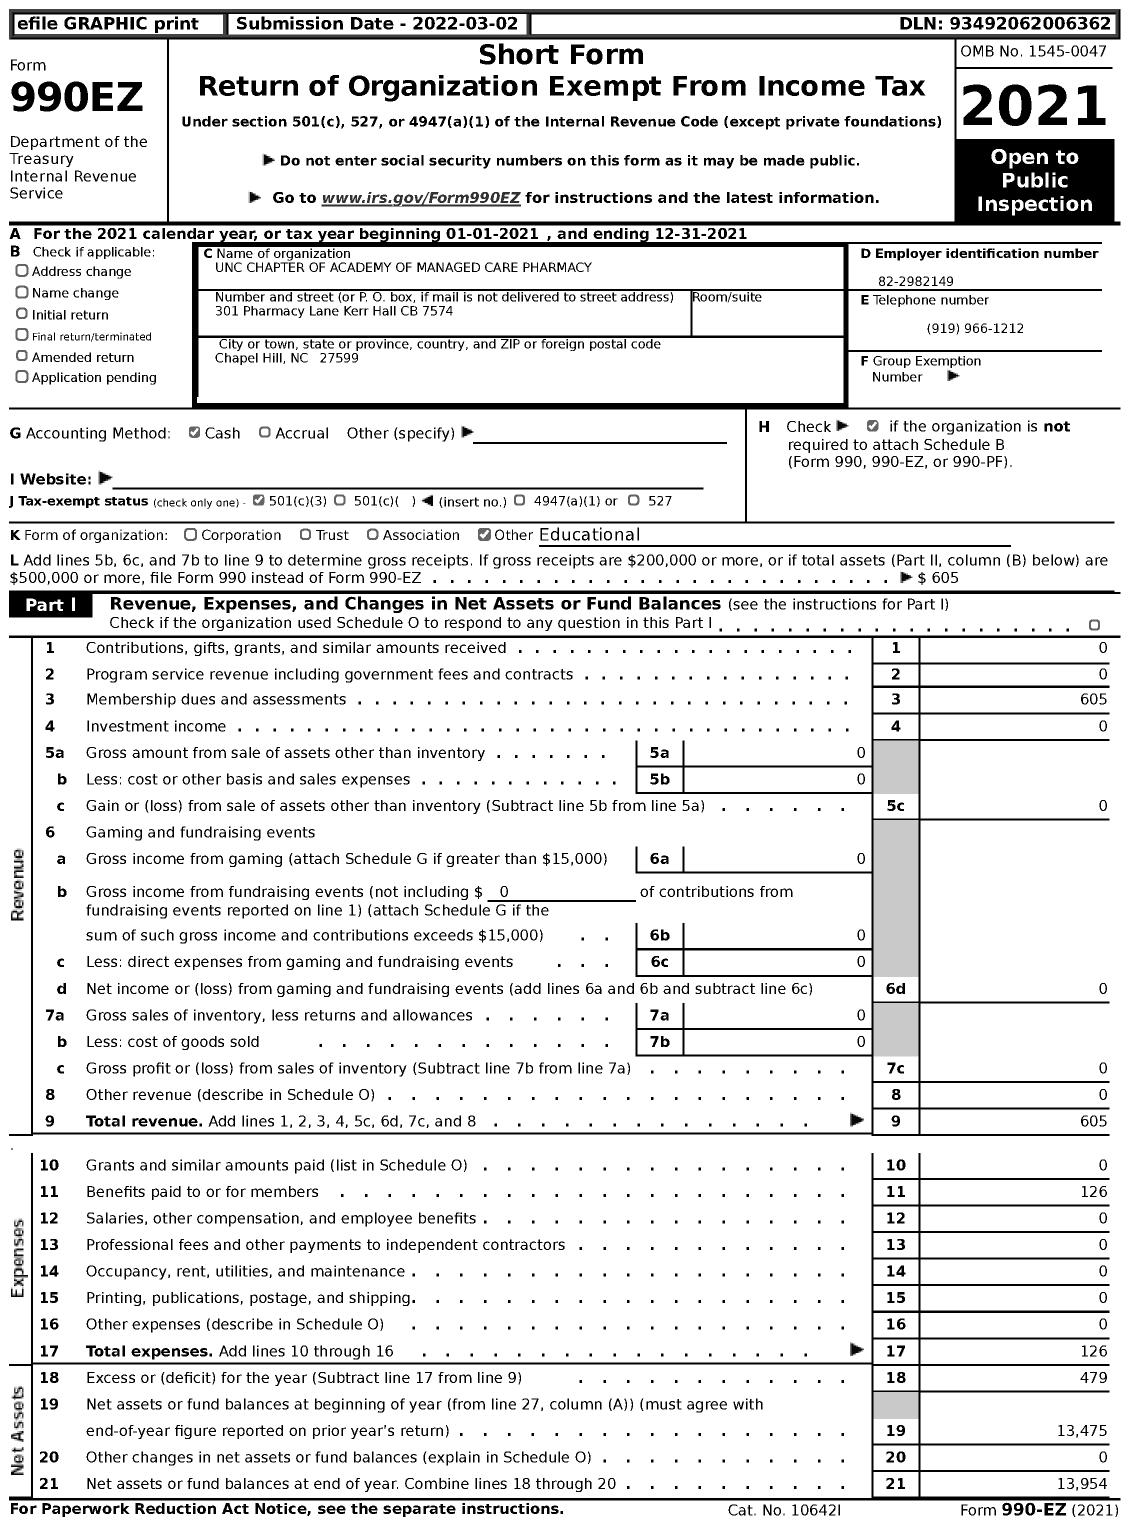 Image of first page of 2021 Form 990EZ for Unc Chapter of Academy of Managed Care Pharmacy